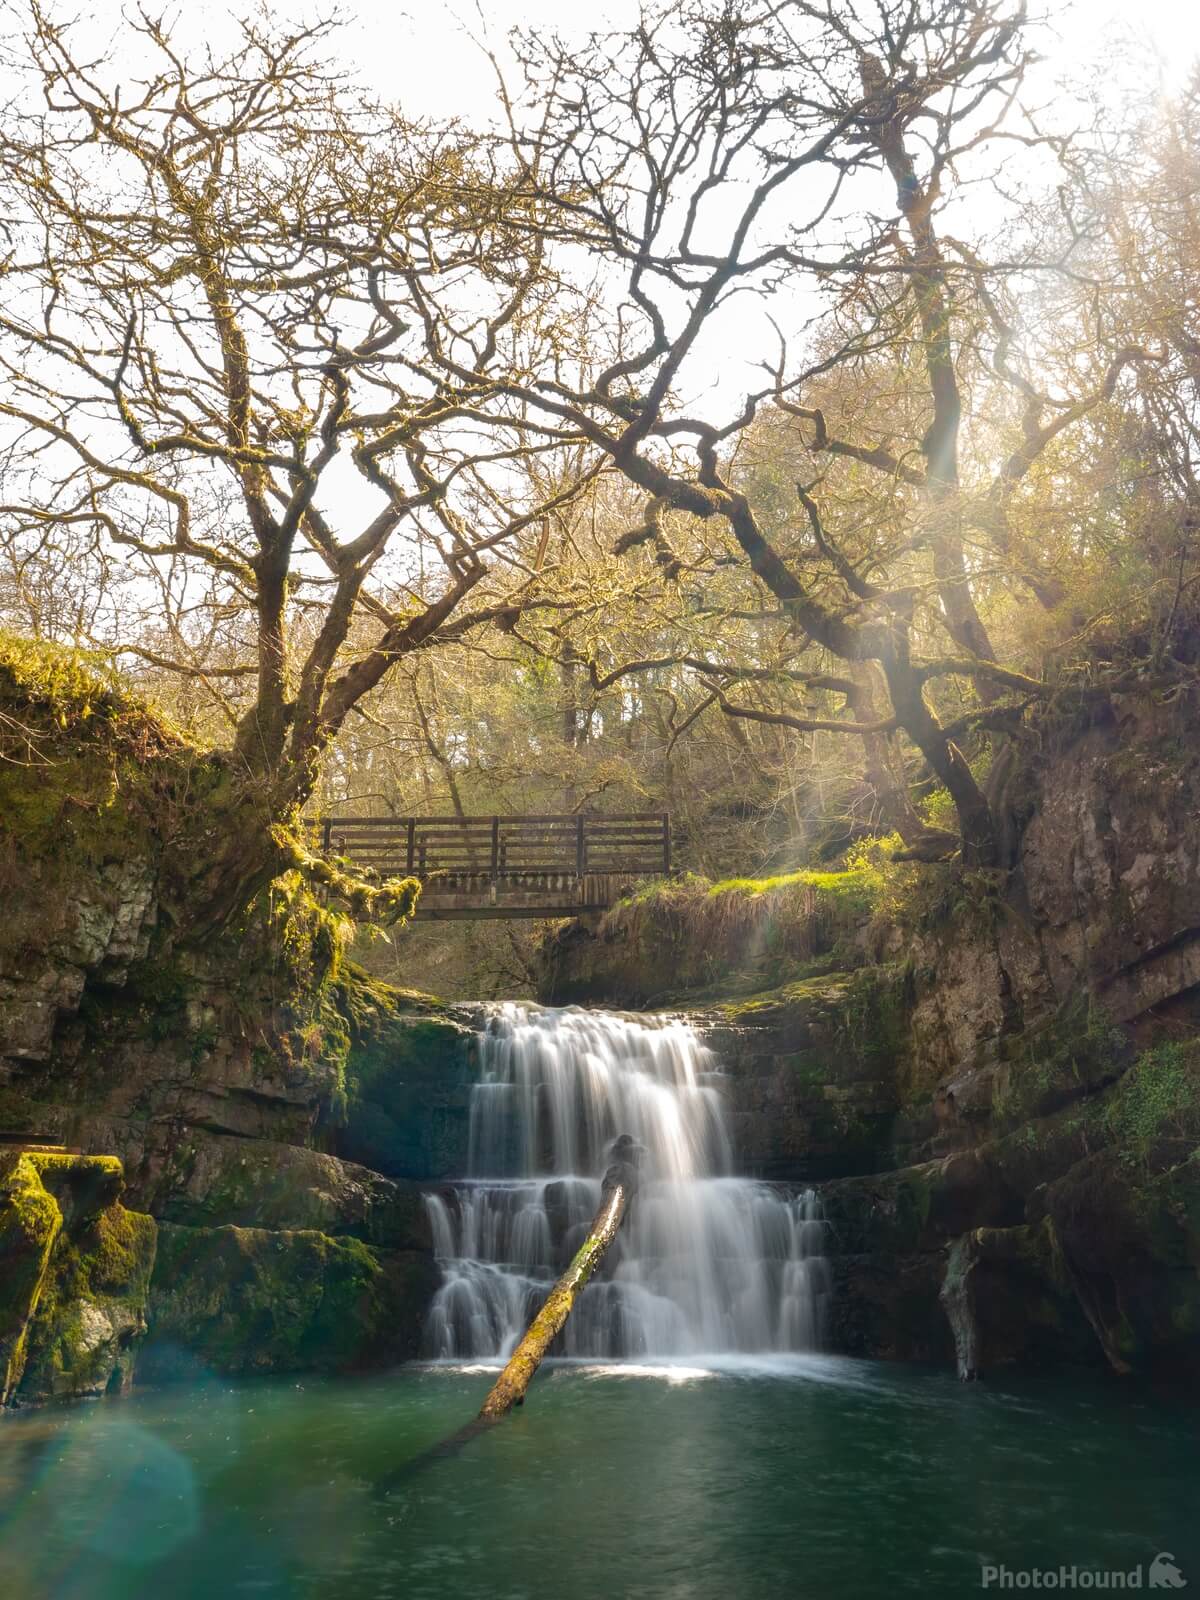 Image of Sychryd Waterfall by Richard Davies